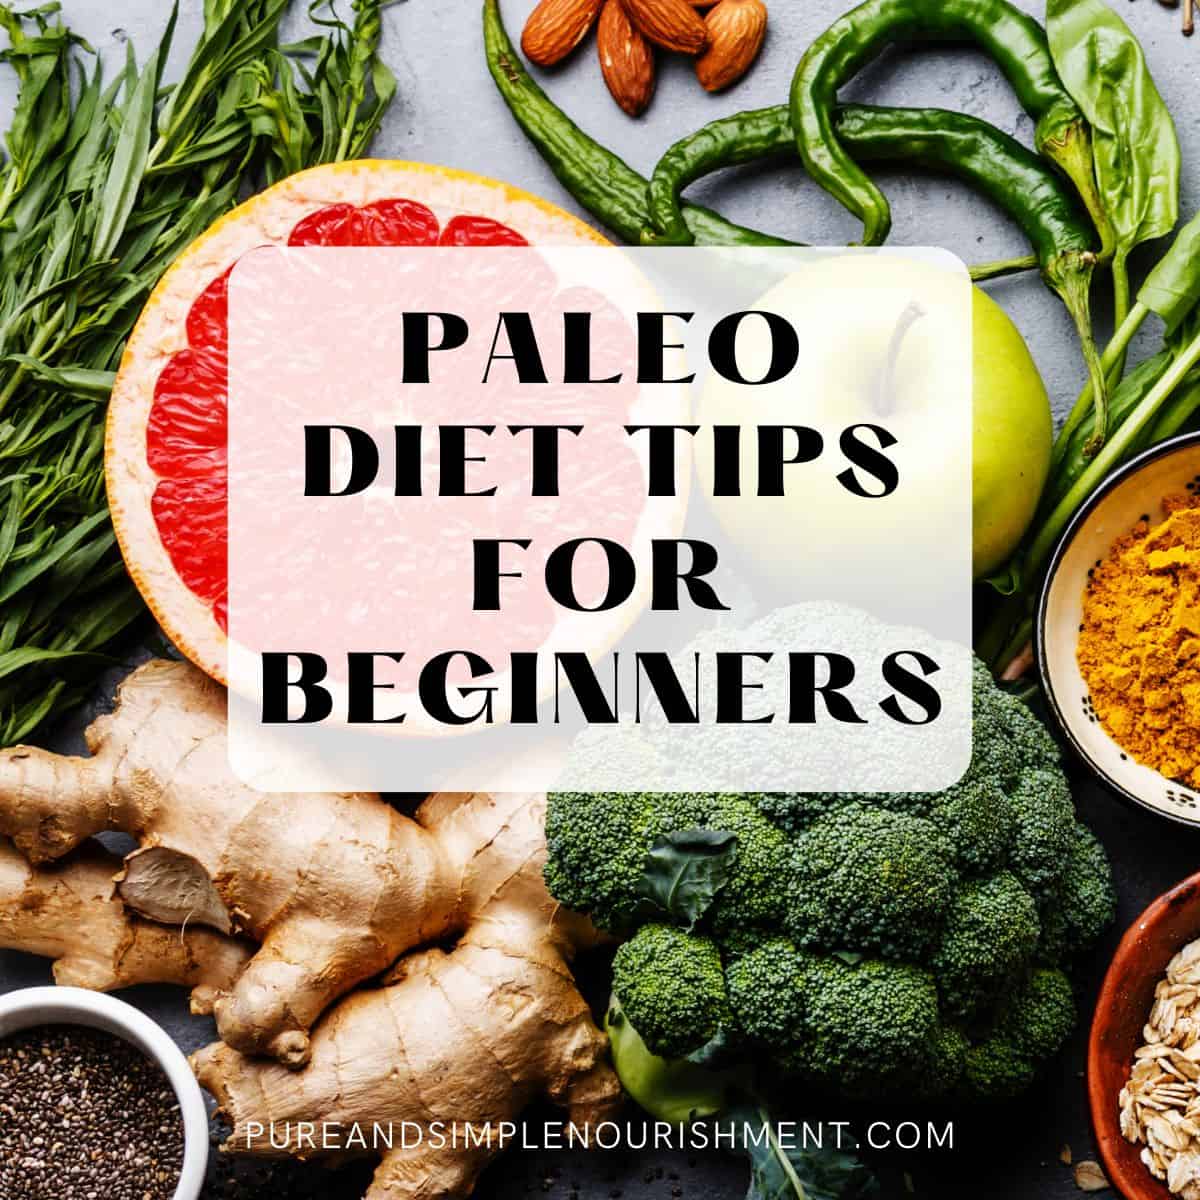 A file of fresh fruits and vegetables with the title Paleo Diet Tips for Beginners over them.